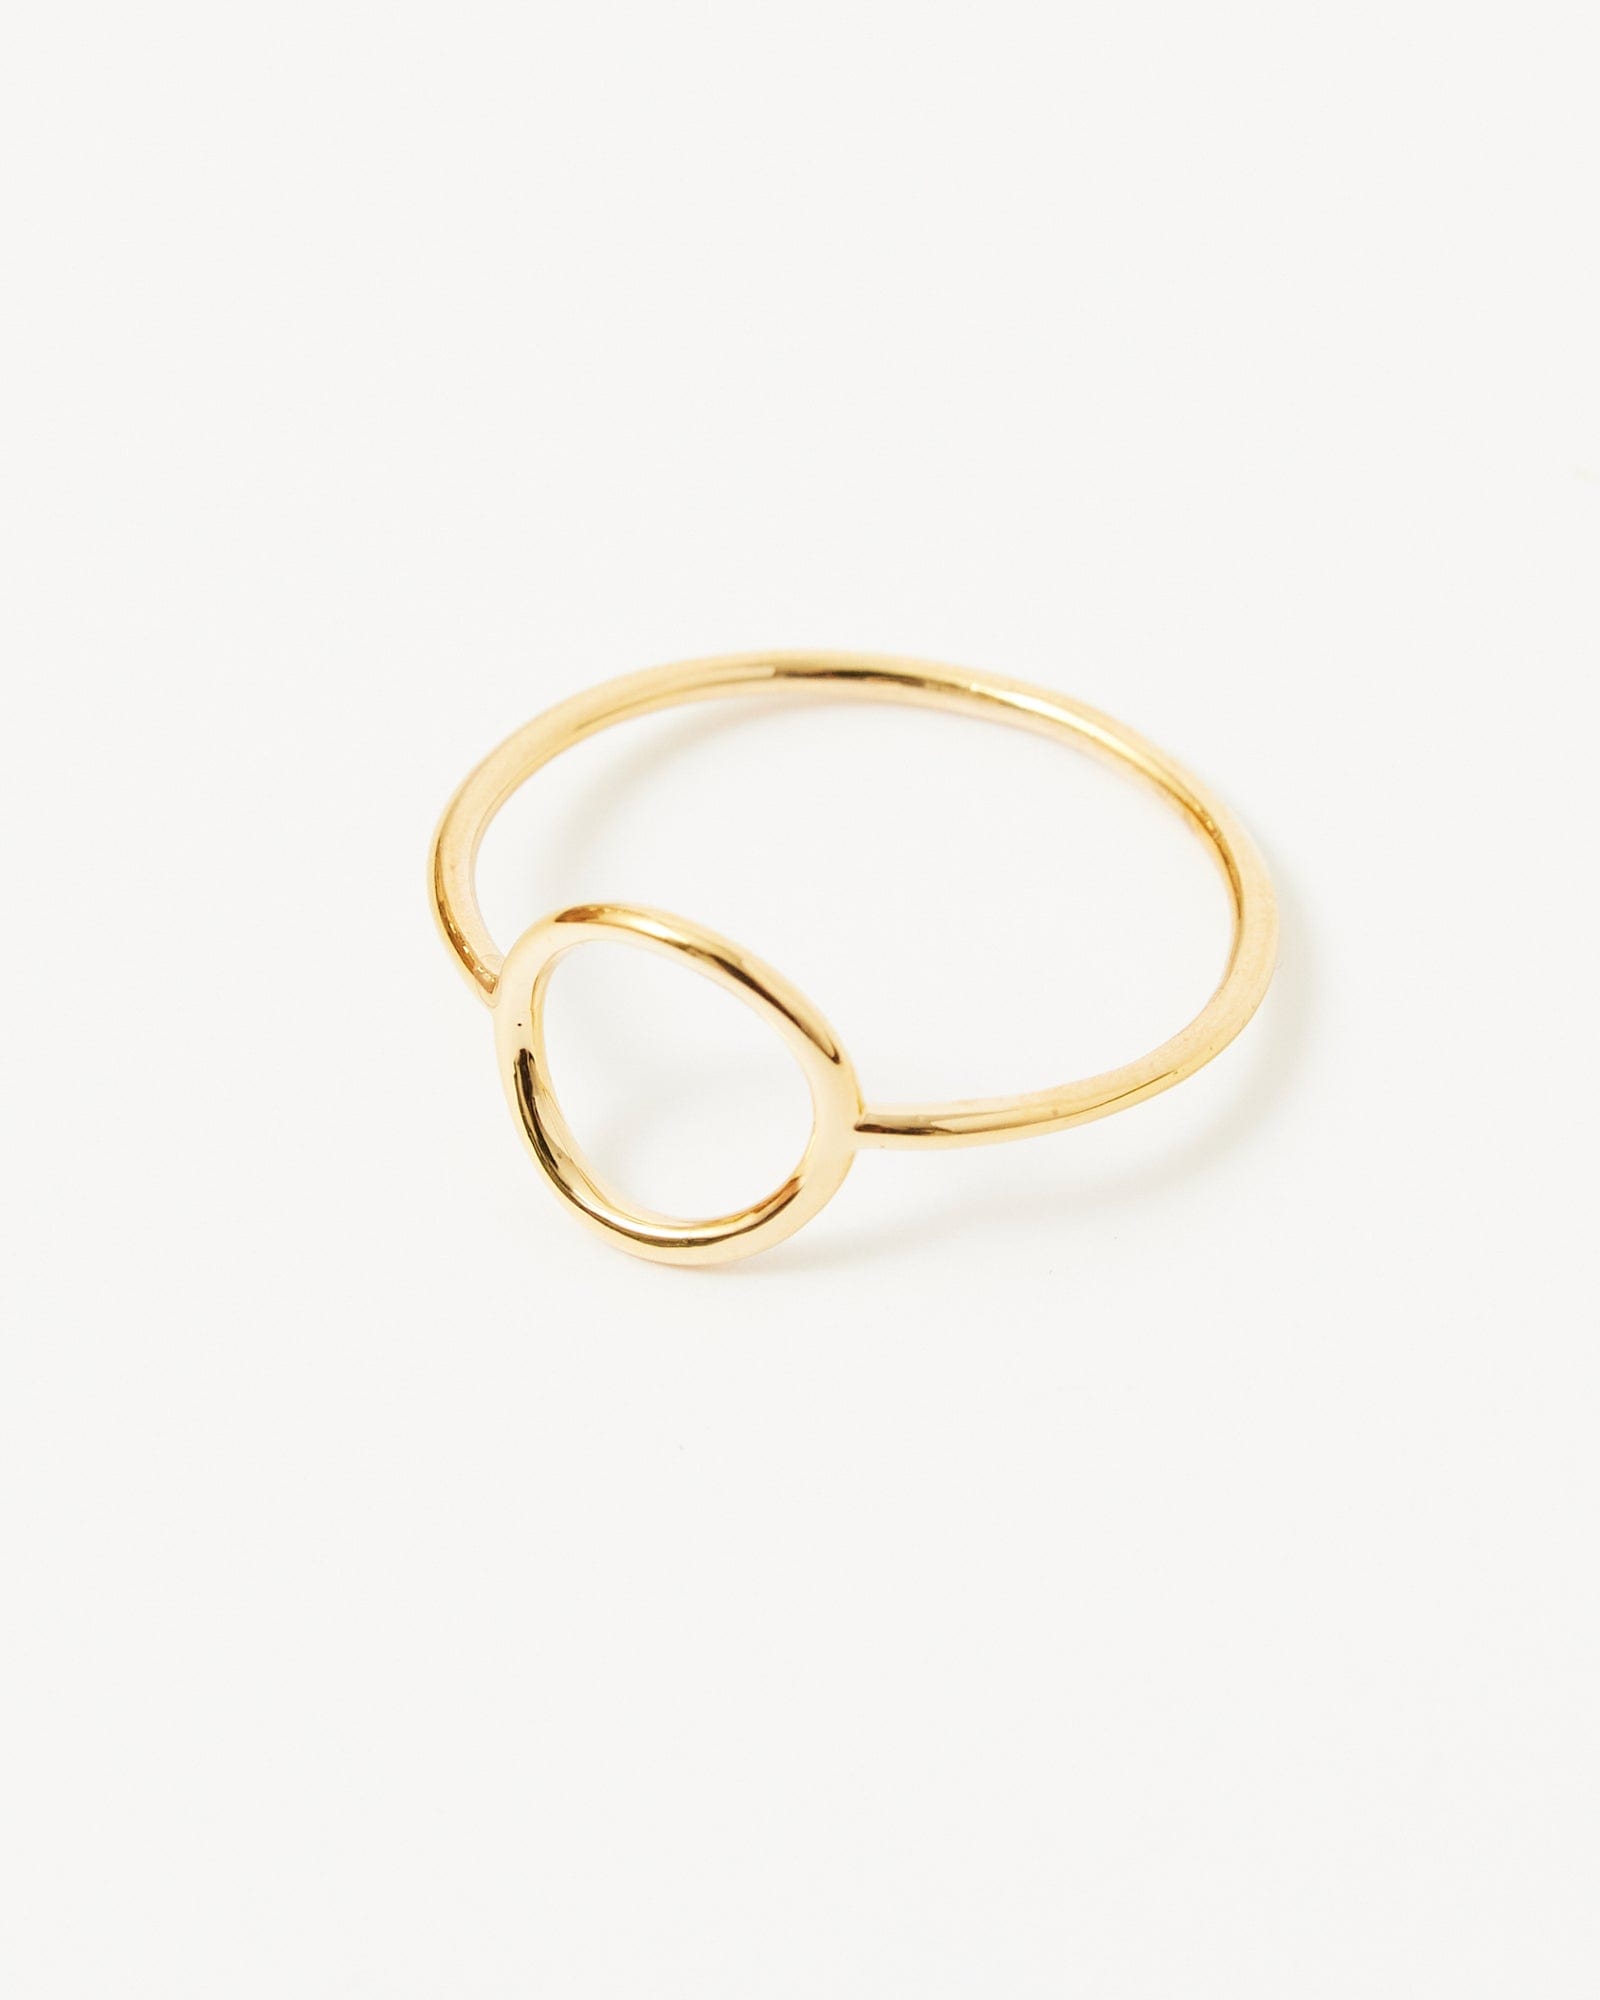 Gold ring with circle design